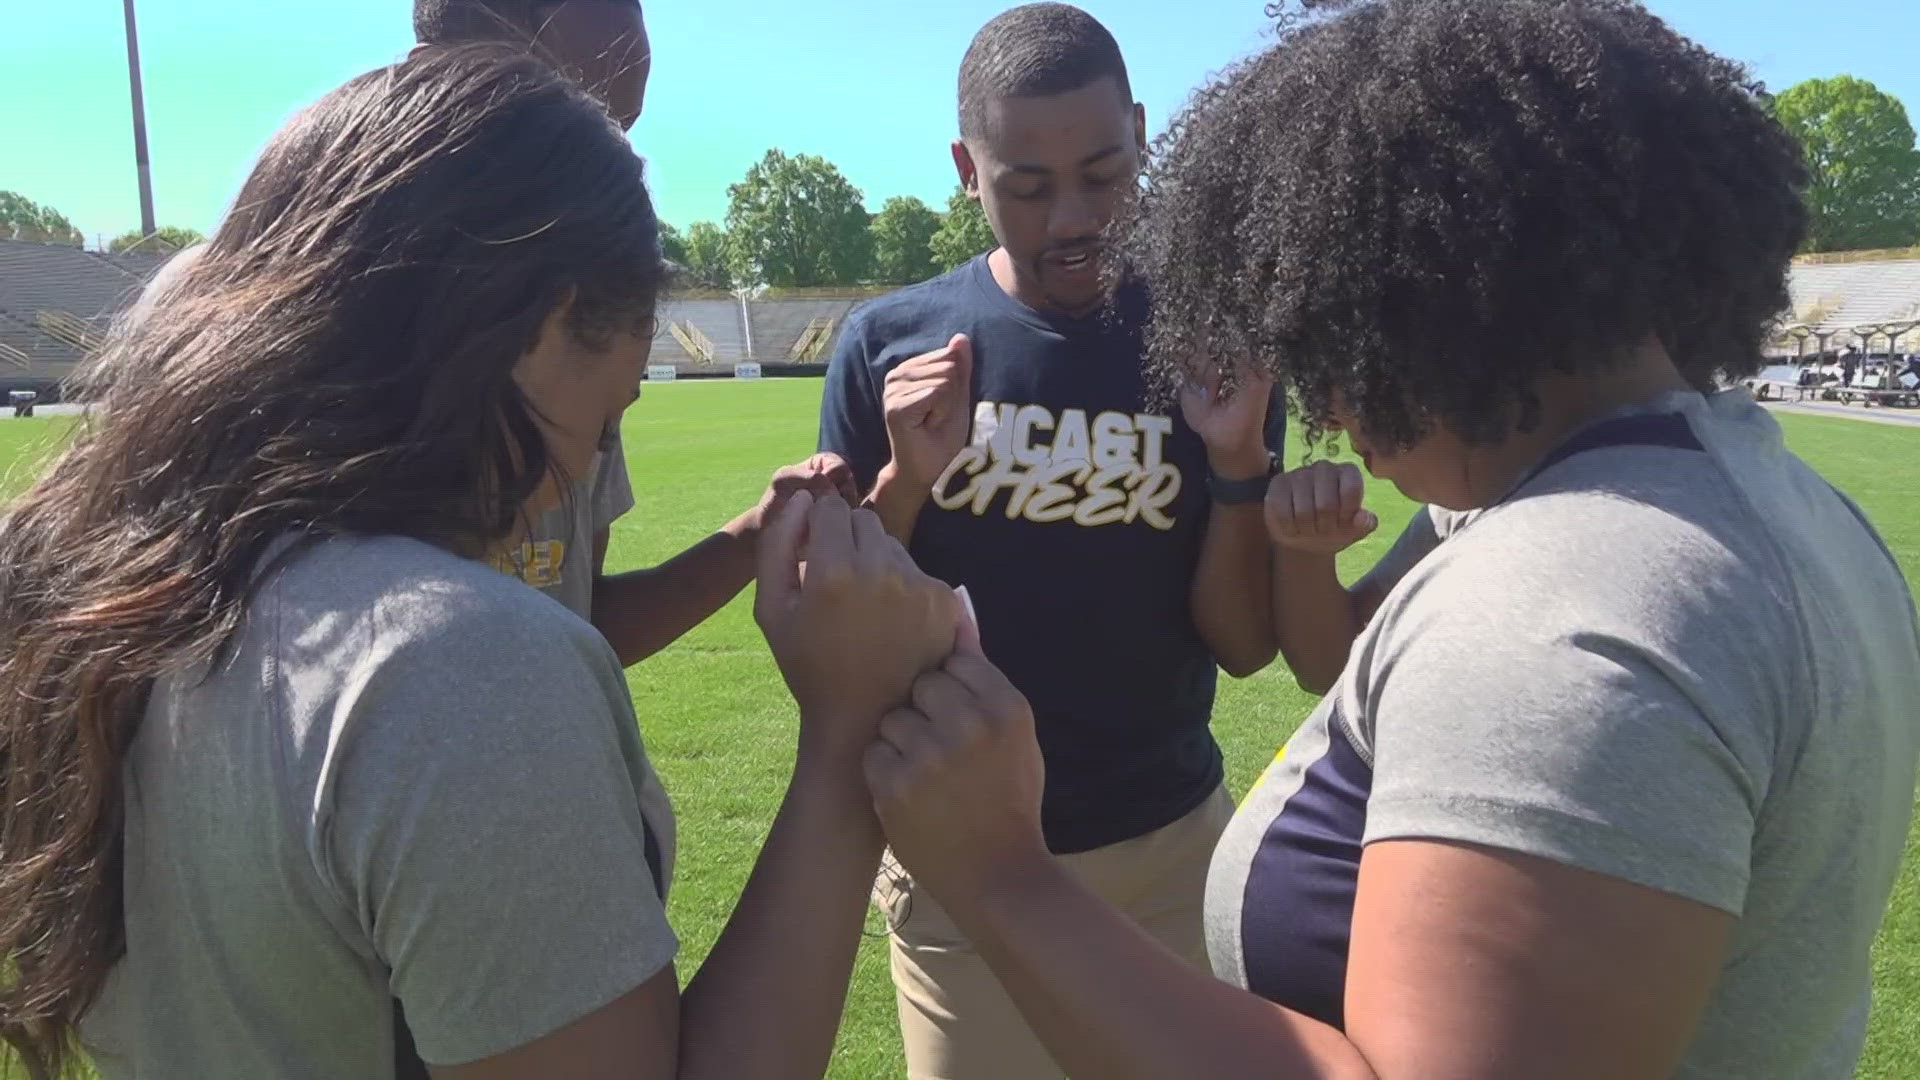 The NC A&T cheerleaders became the first HBCU team in NC to win an NCA National Championship.